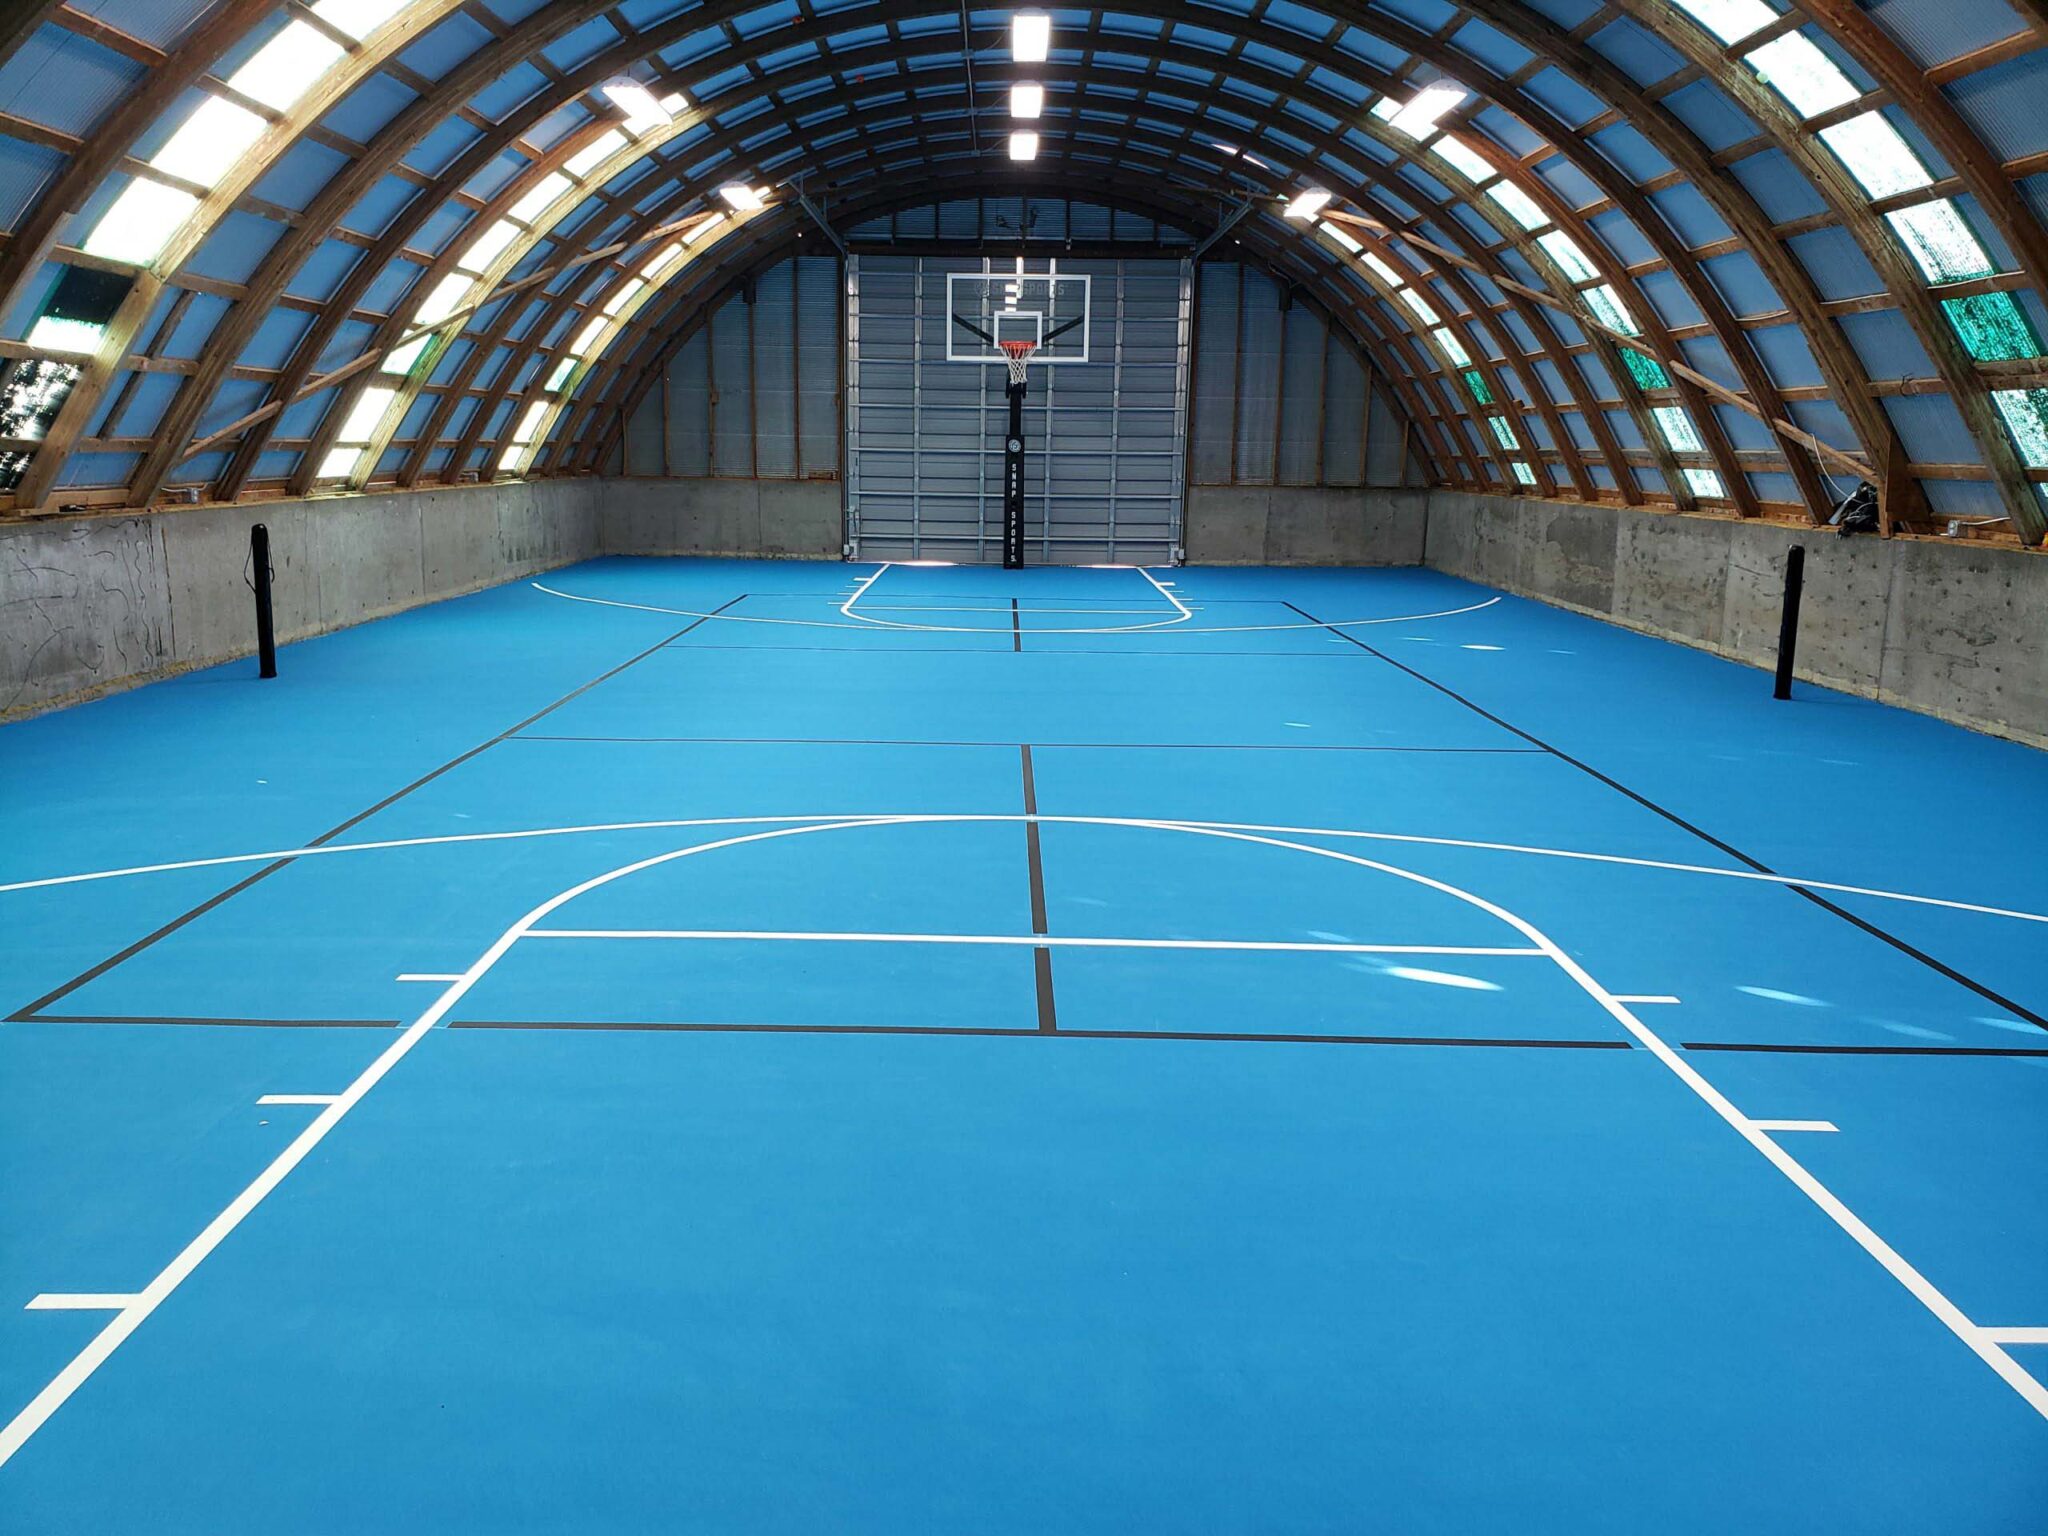 A basketball court including lines for pickleball where the court is blue, the basketball lines are white, and the pickleball lines are black. The court is enclosed in a domed garage.